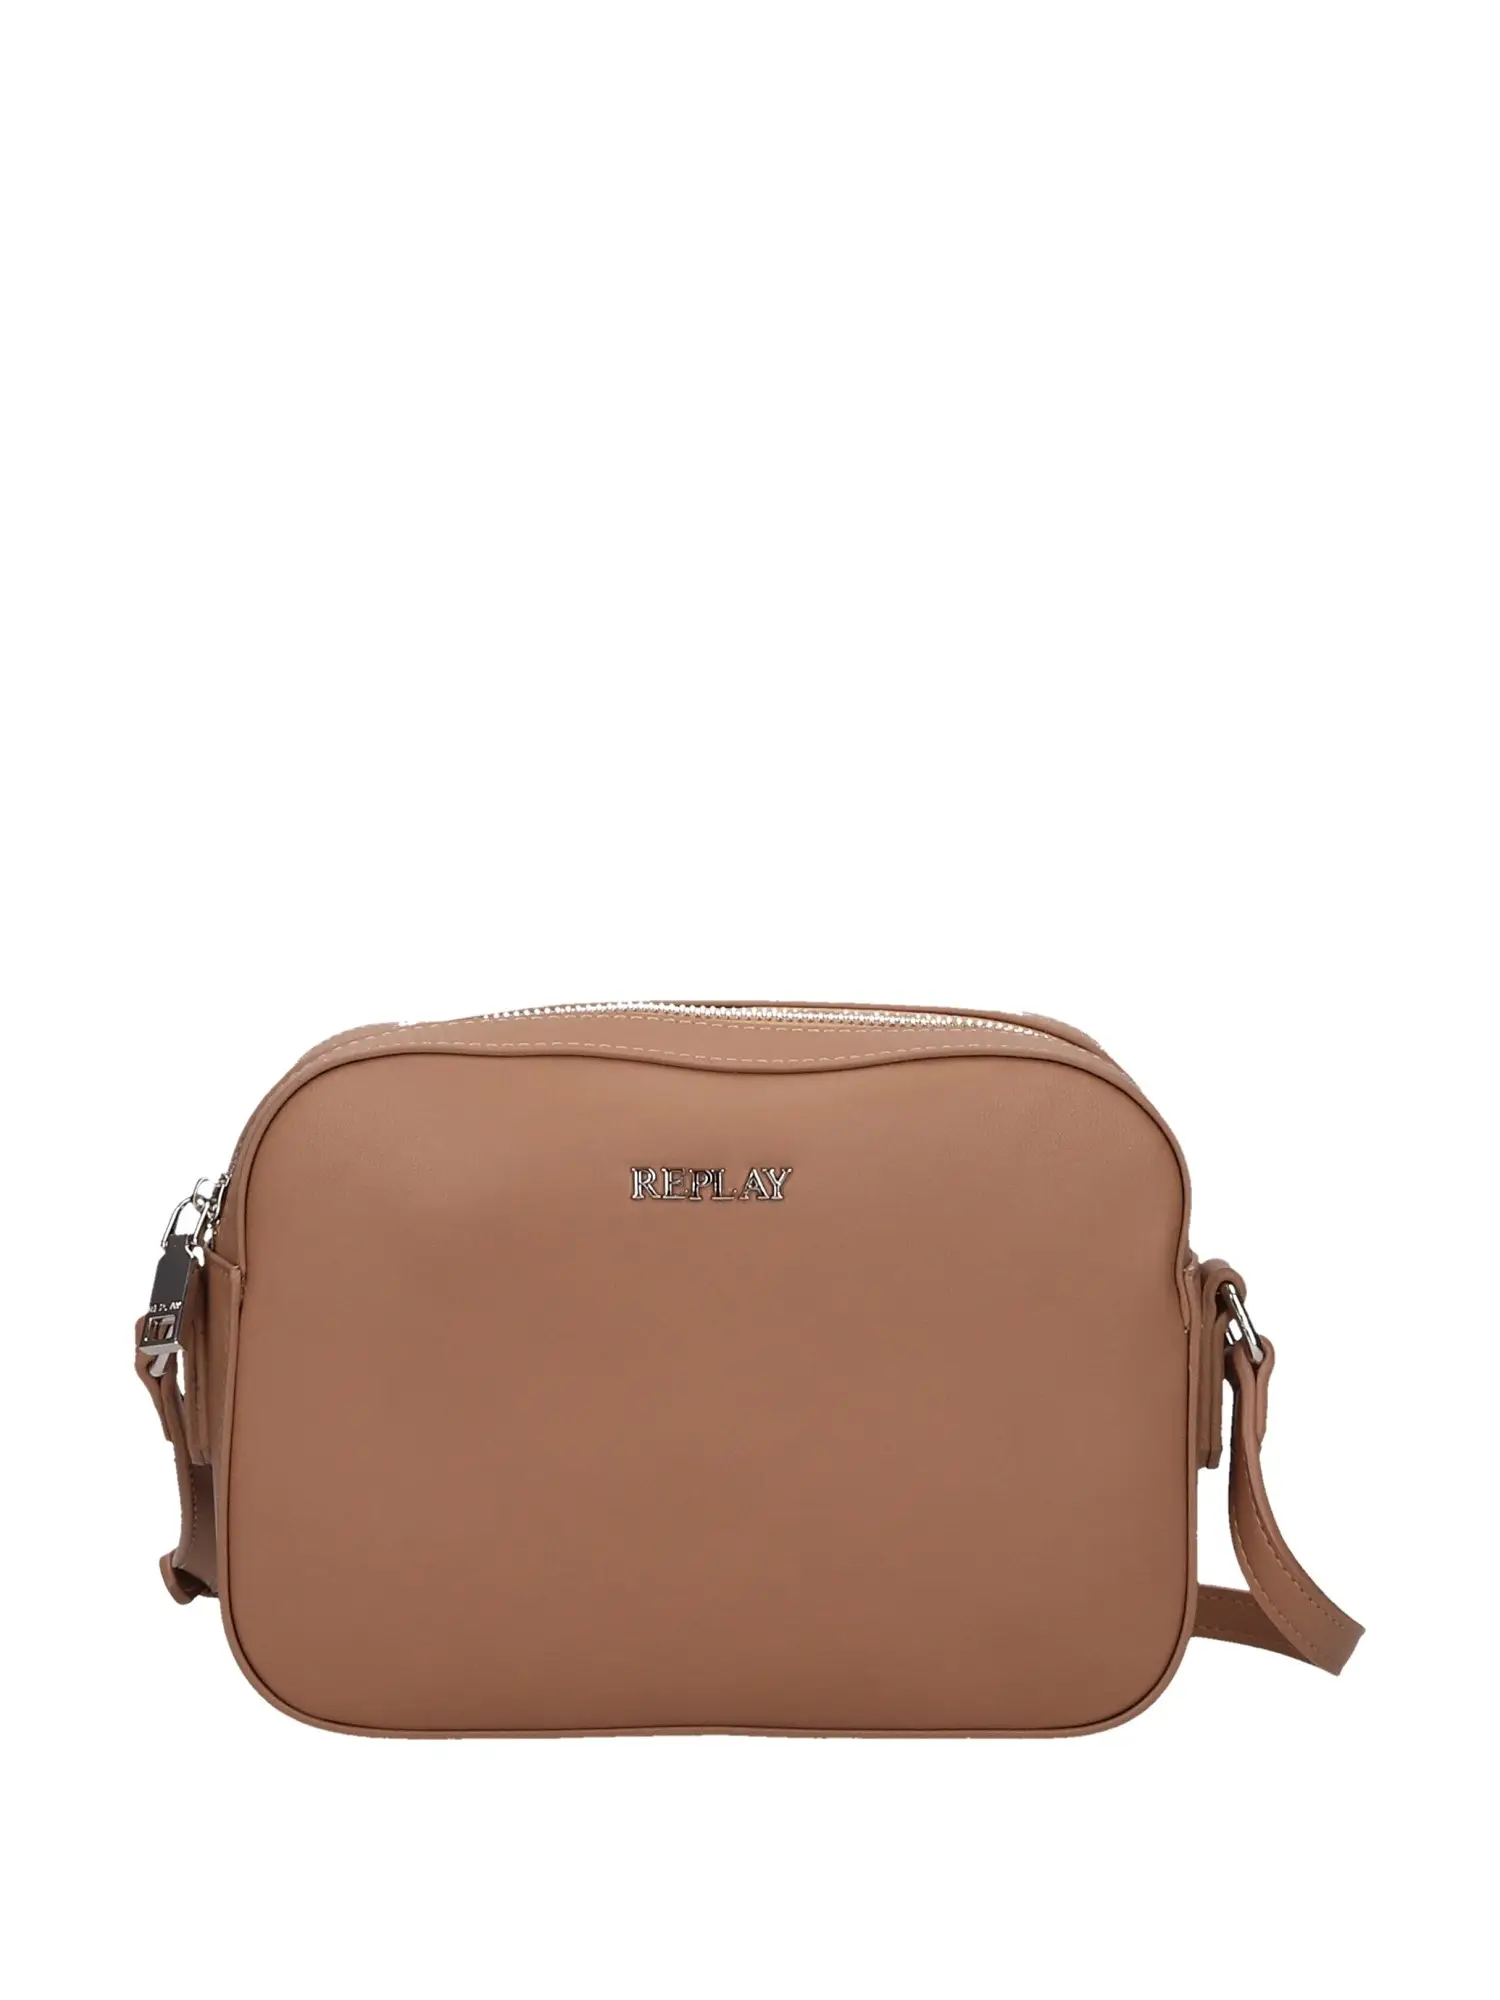 TRACOLLA DONNA - REPLAY - FW3334.006.A0420A - BEIGE, UNICA